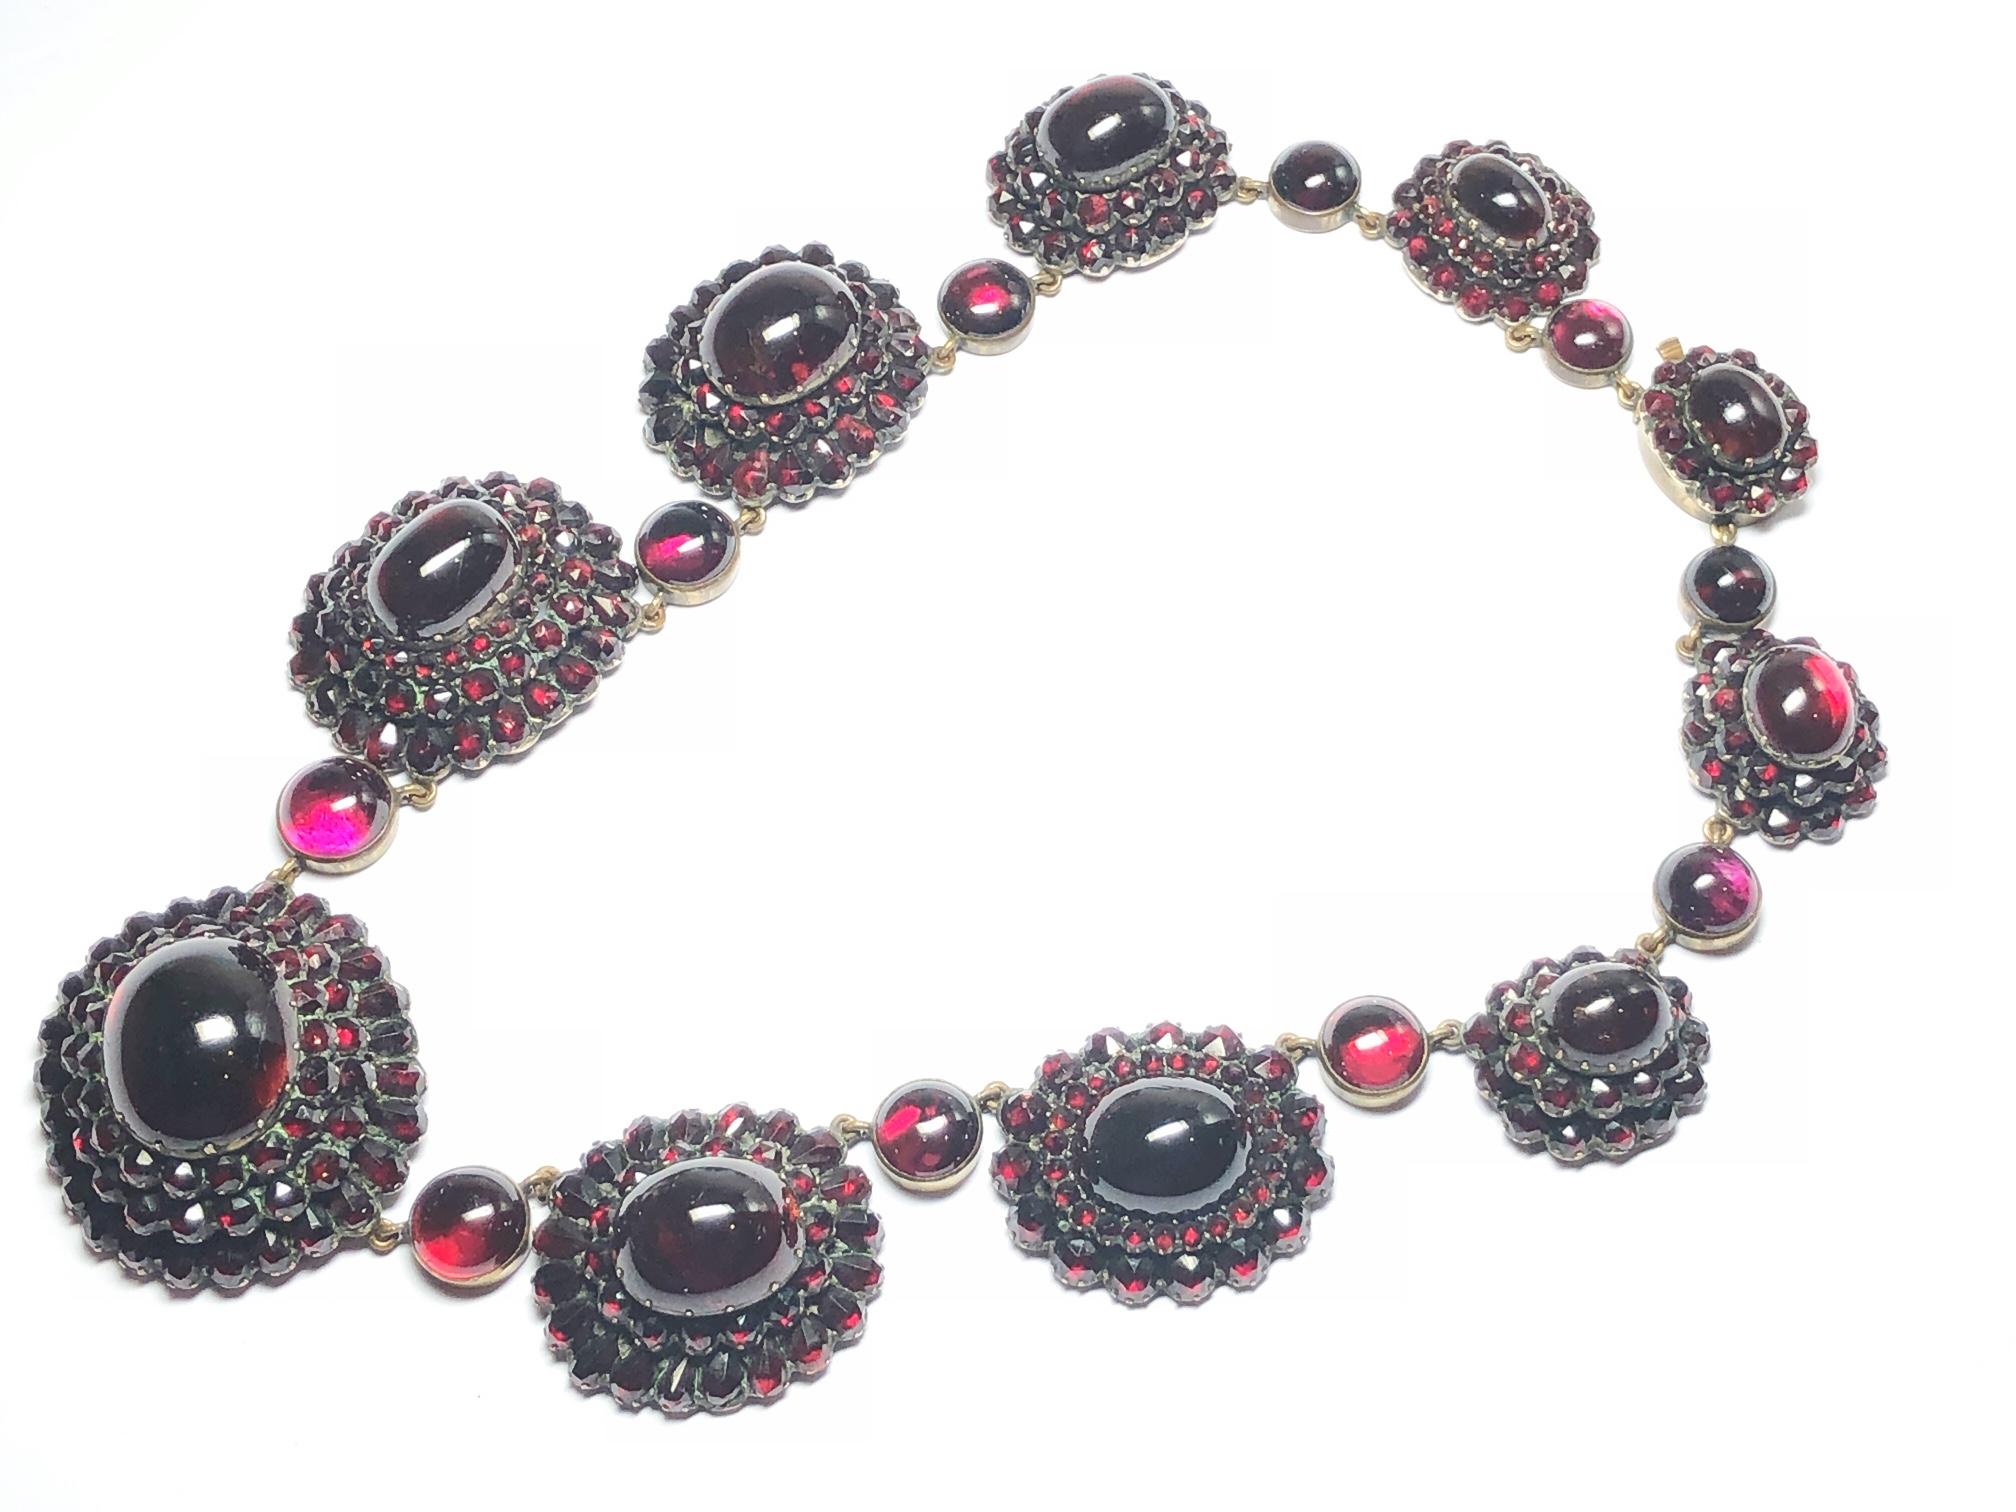 A Victorian Bohemian garnet necklace, with ten graduating clusters, set with cabochon garnets in the centres, surrounded by rows of round and pear shaped, rose-cut garnets, mounted in closed back silver gilt, with cabochon garnet spacers in